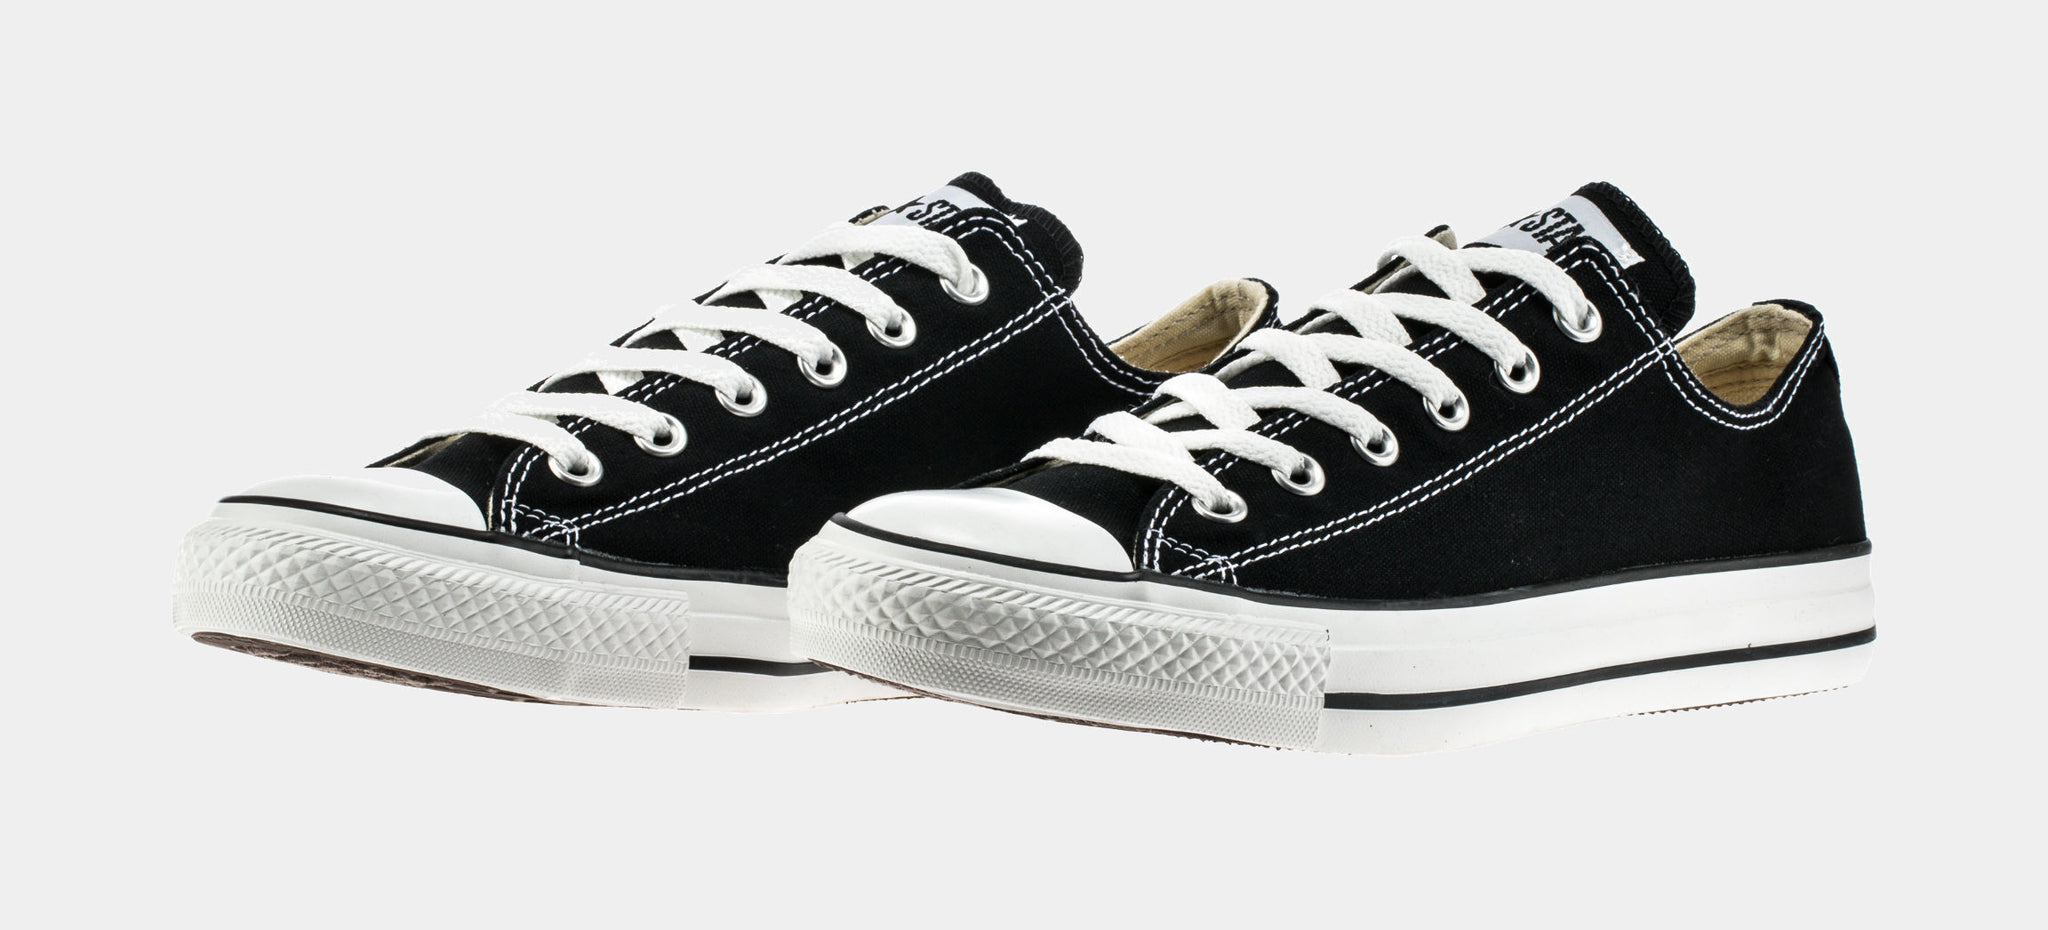 CONVERSE ALL STAR CHUCK TAYLOR LOW M9166 BLACK / WHITE